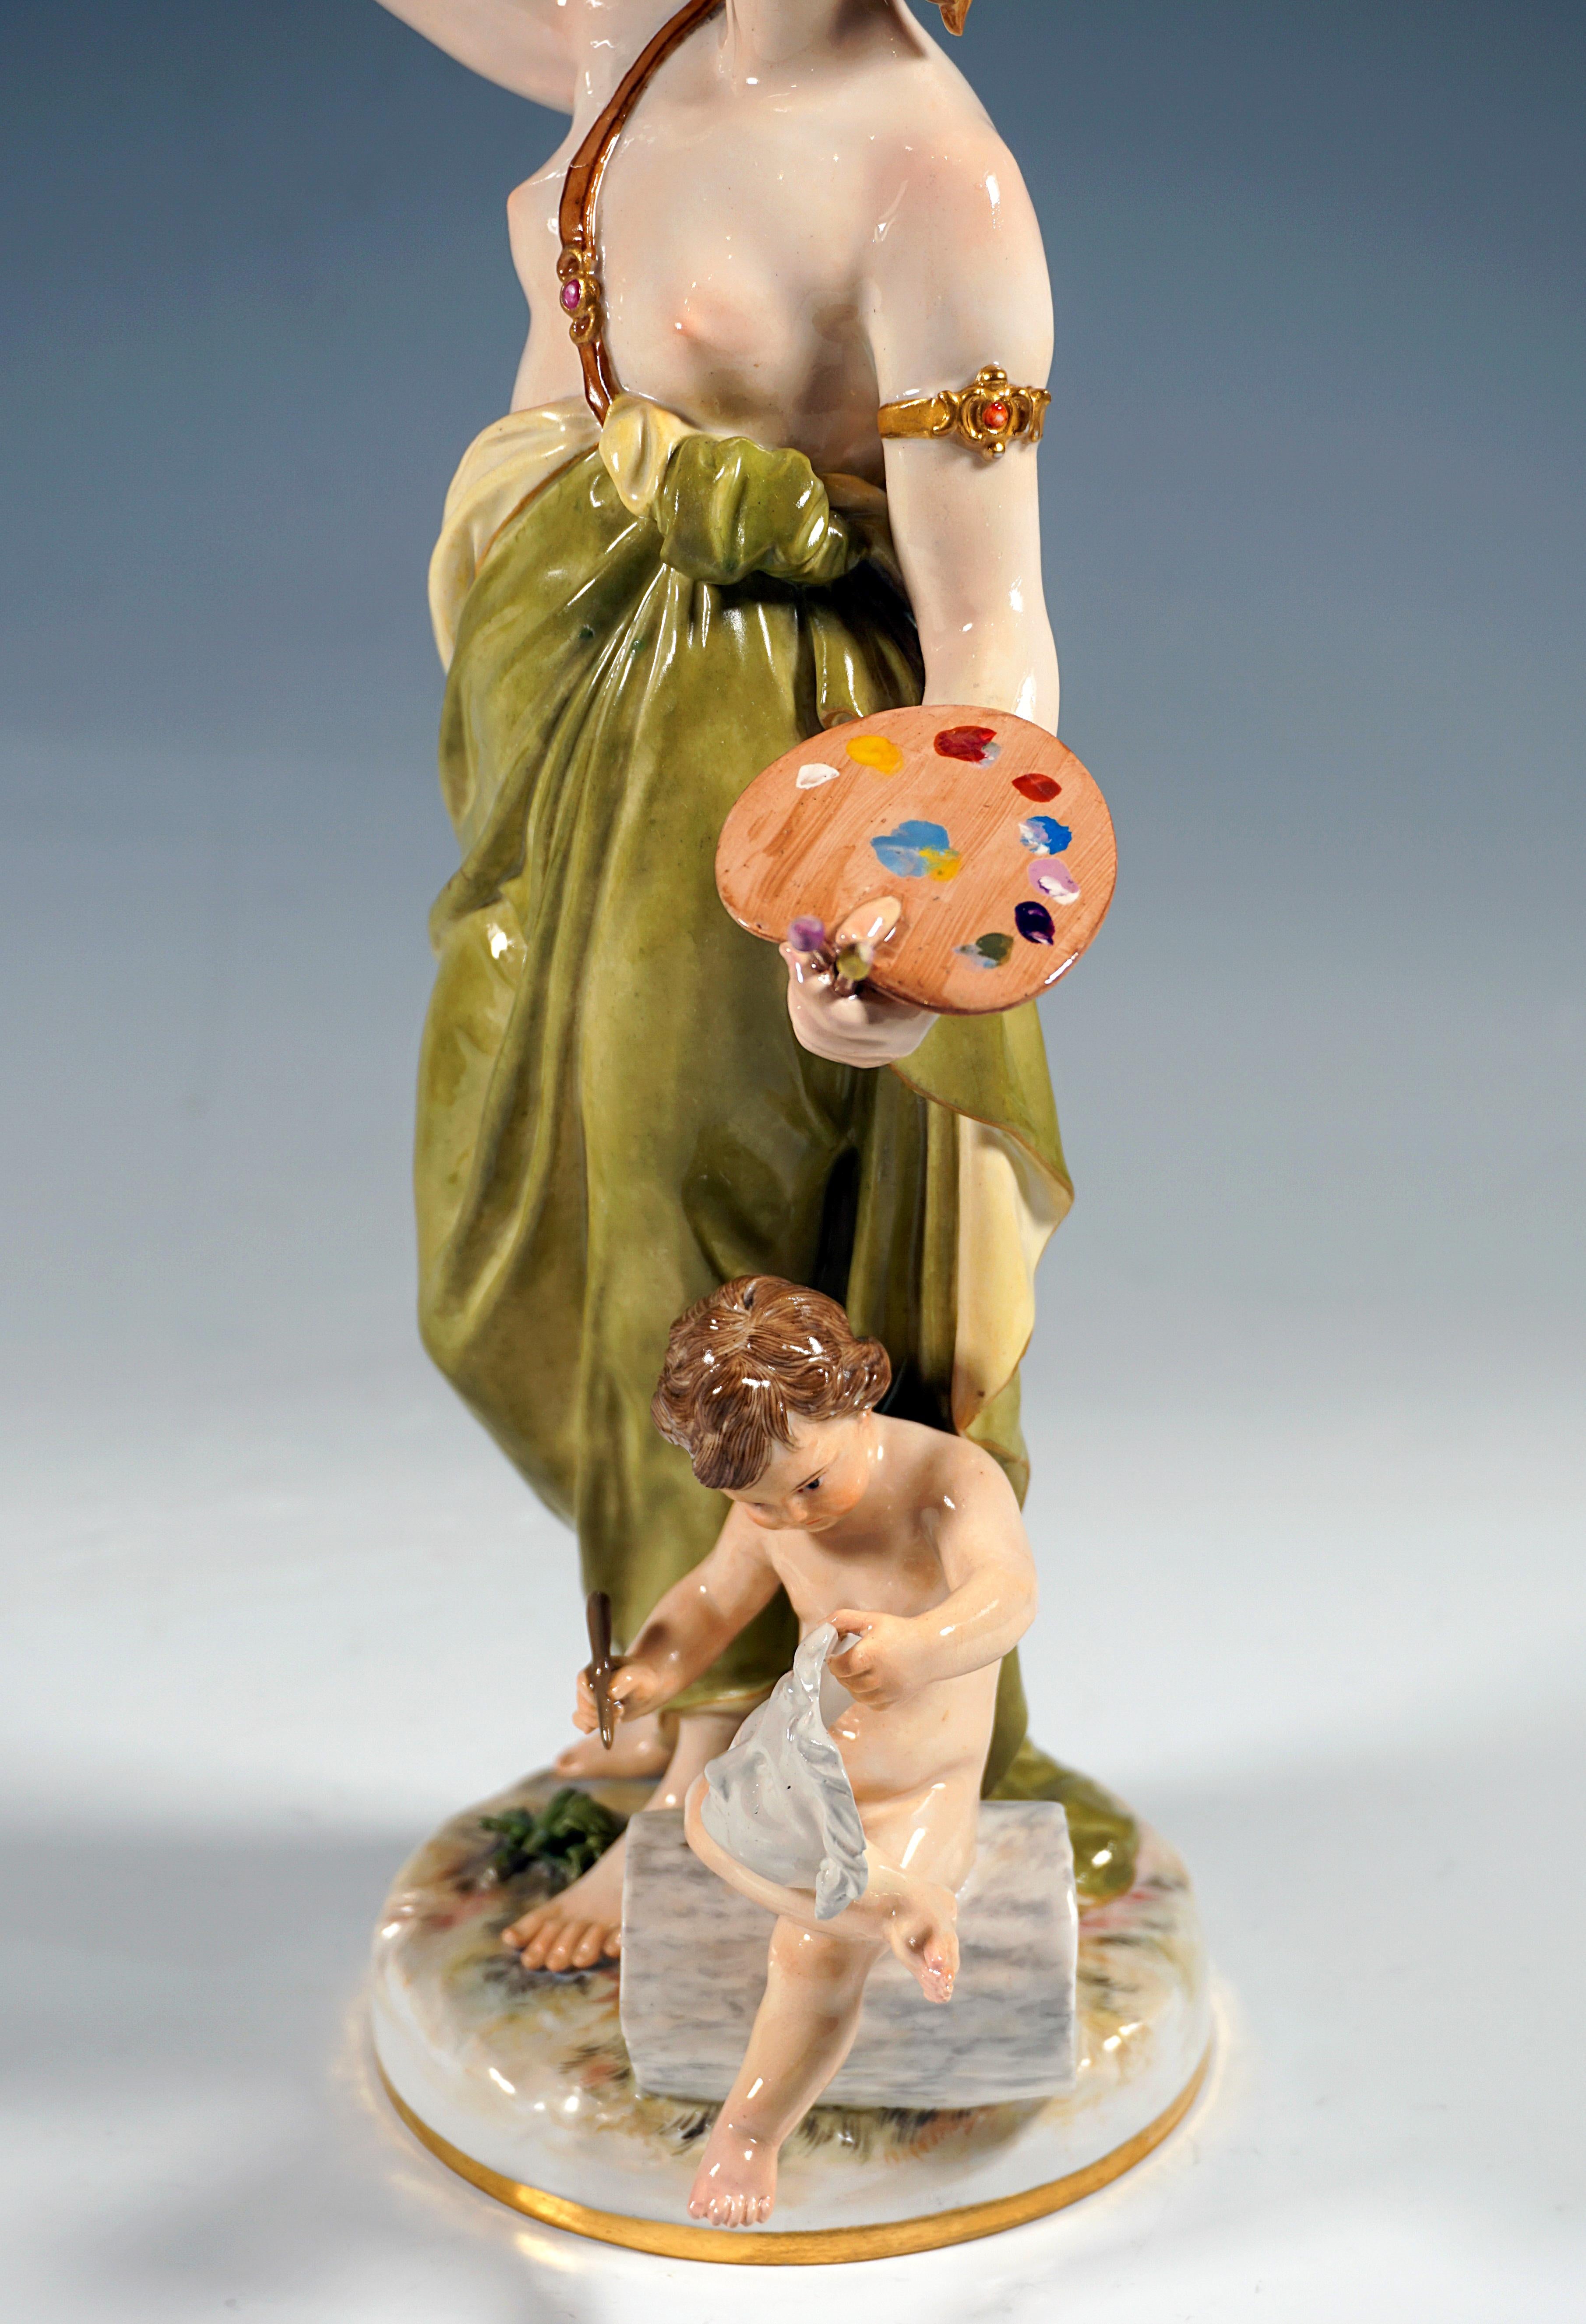 Late 19th Century Large Meissen Figurine, 'The Painting', by Johann Christian Hirt, Ca 1885